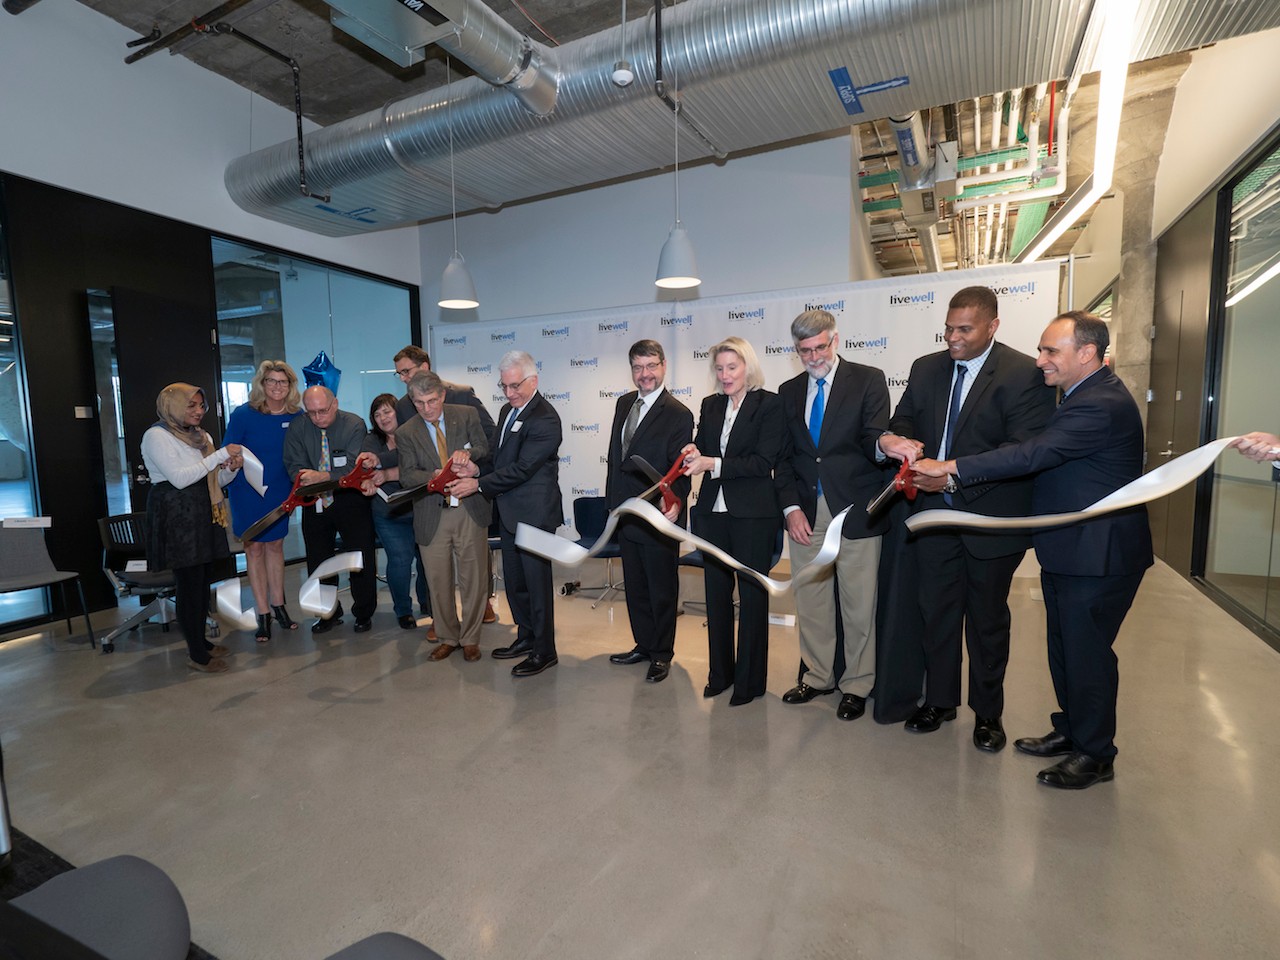 A line of people cut a ribbon with giant scissors at the LiveWell grand opening at the 1819 Innovation Hub